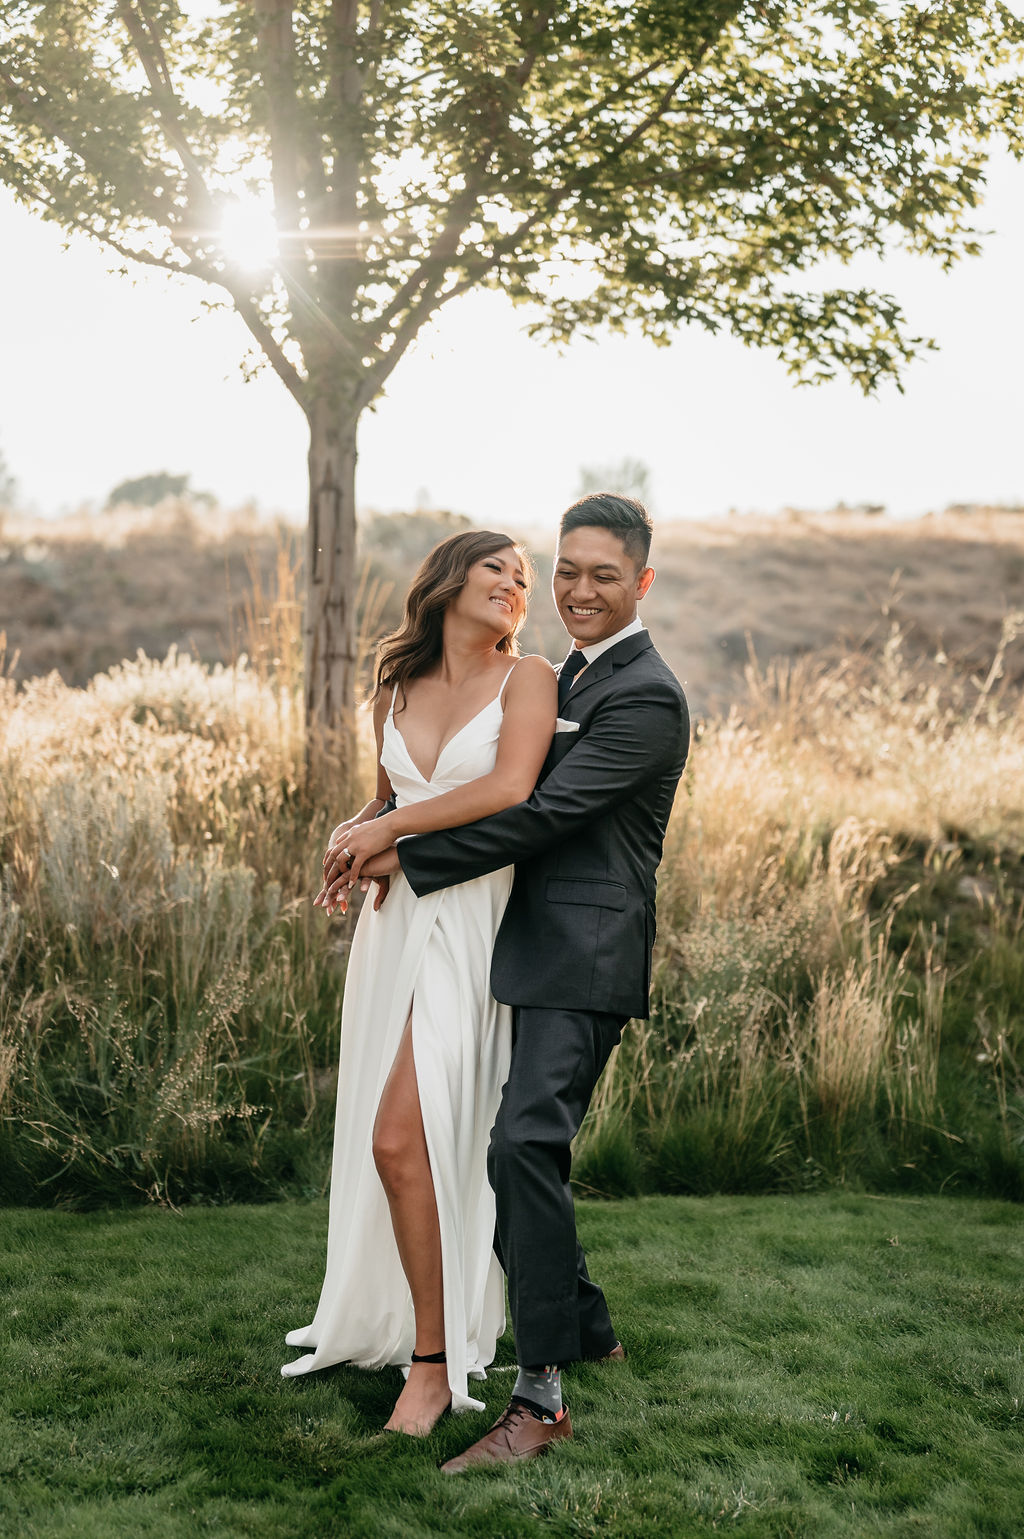 intimate elopement with family and friends, summer wedding inspiration, wedding portraits 